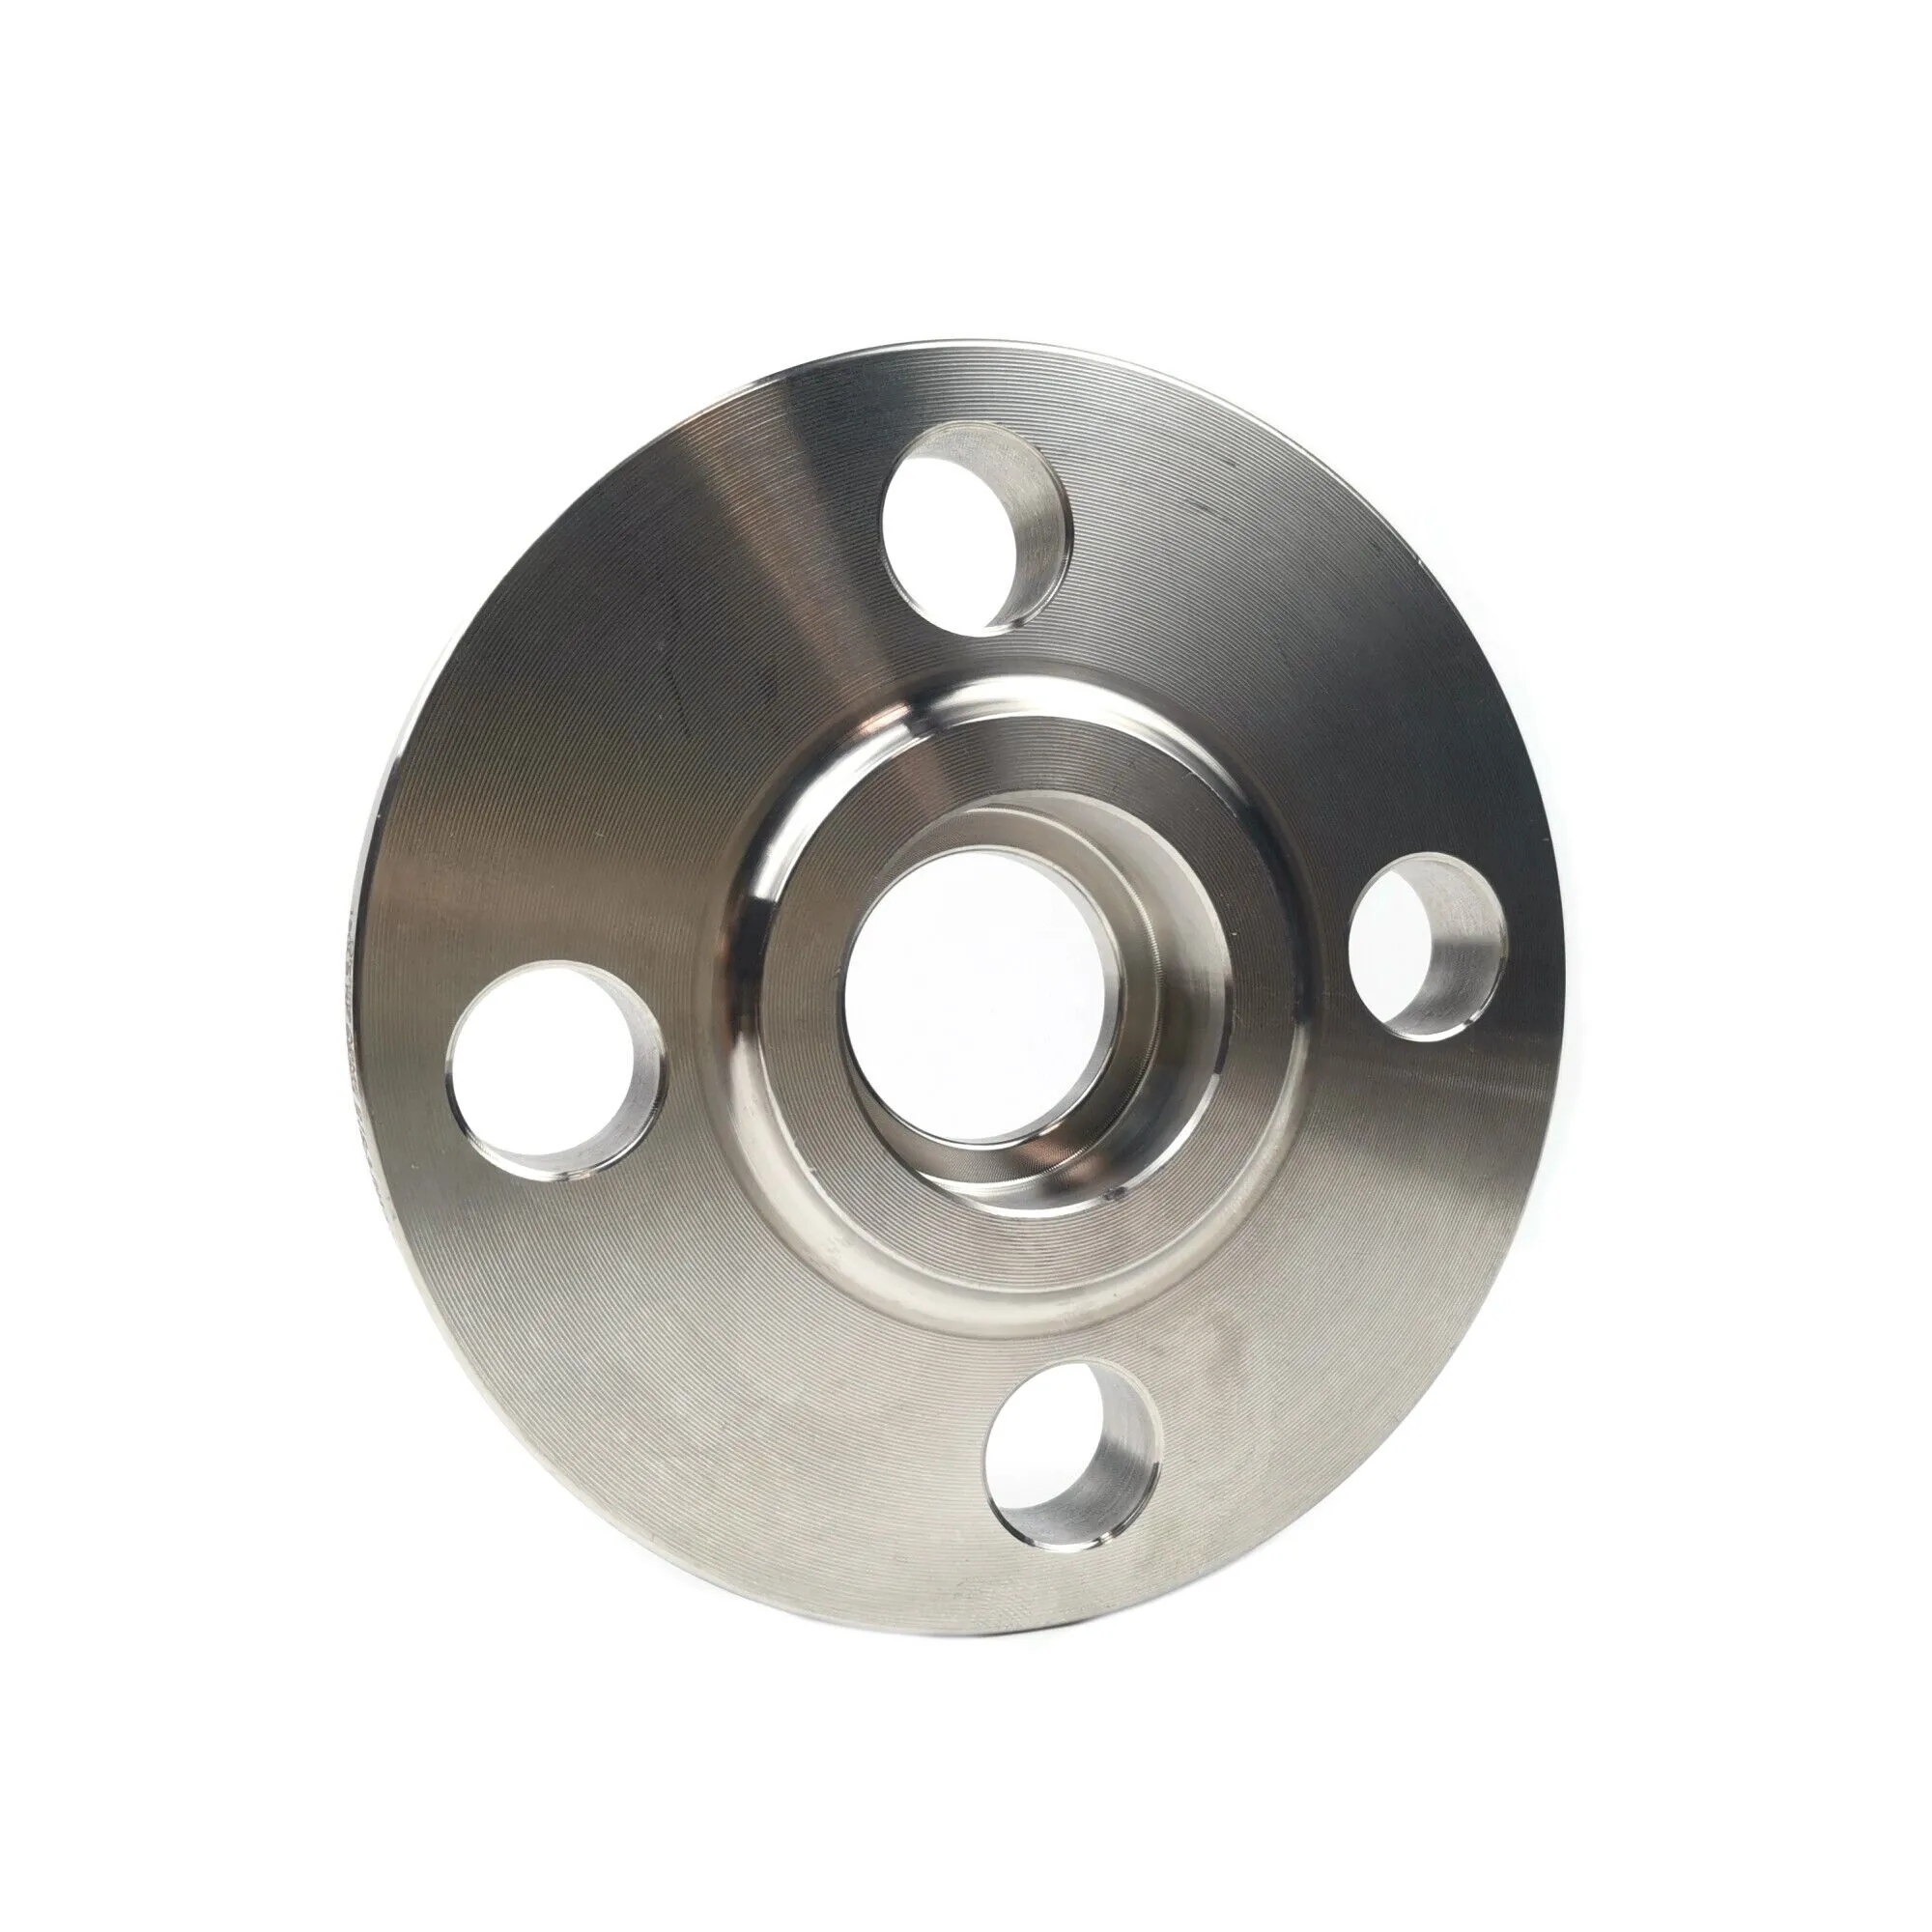 Forged Stainless Steel SW Flange, ANSI B16.5, 2 Inch, 300 LB